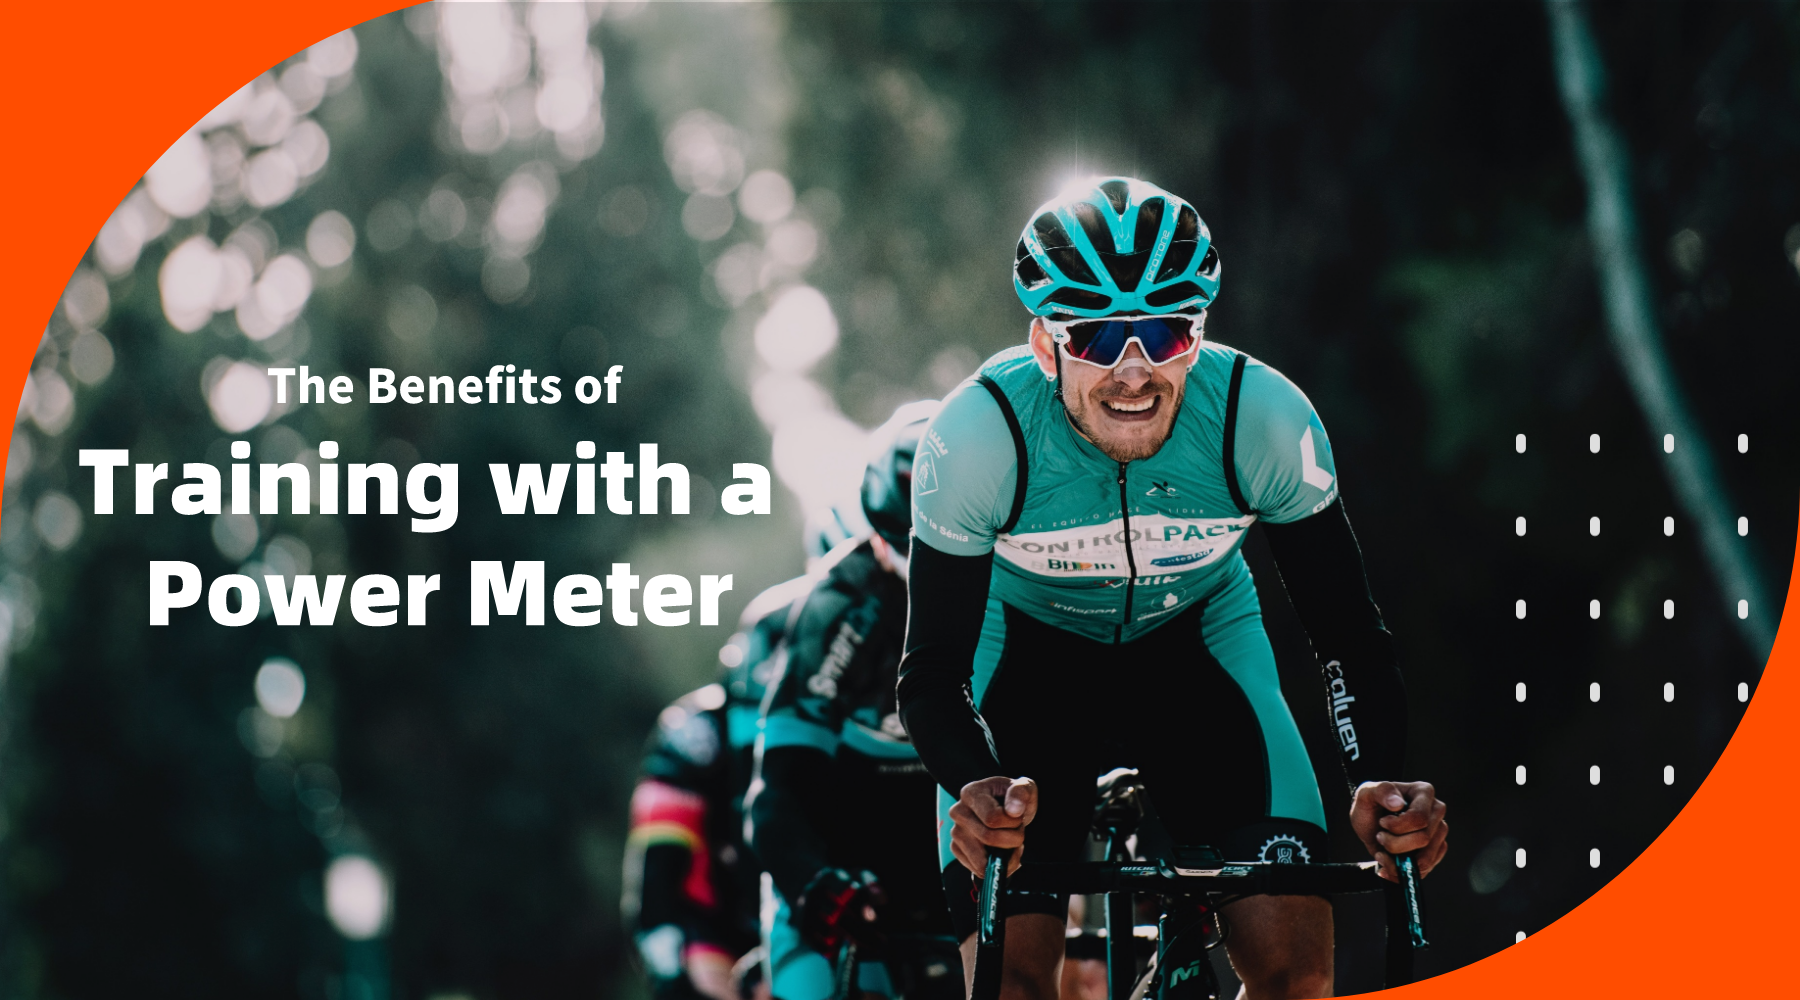 The benifits of training with a power meter